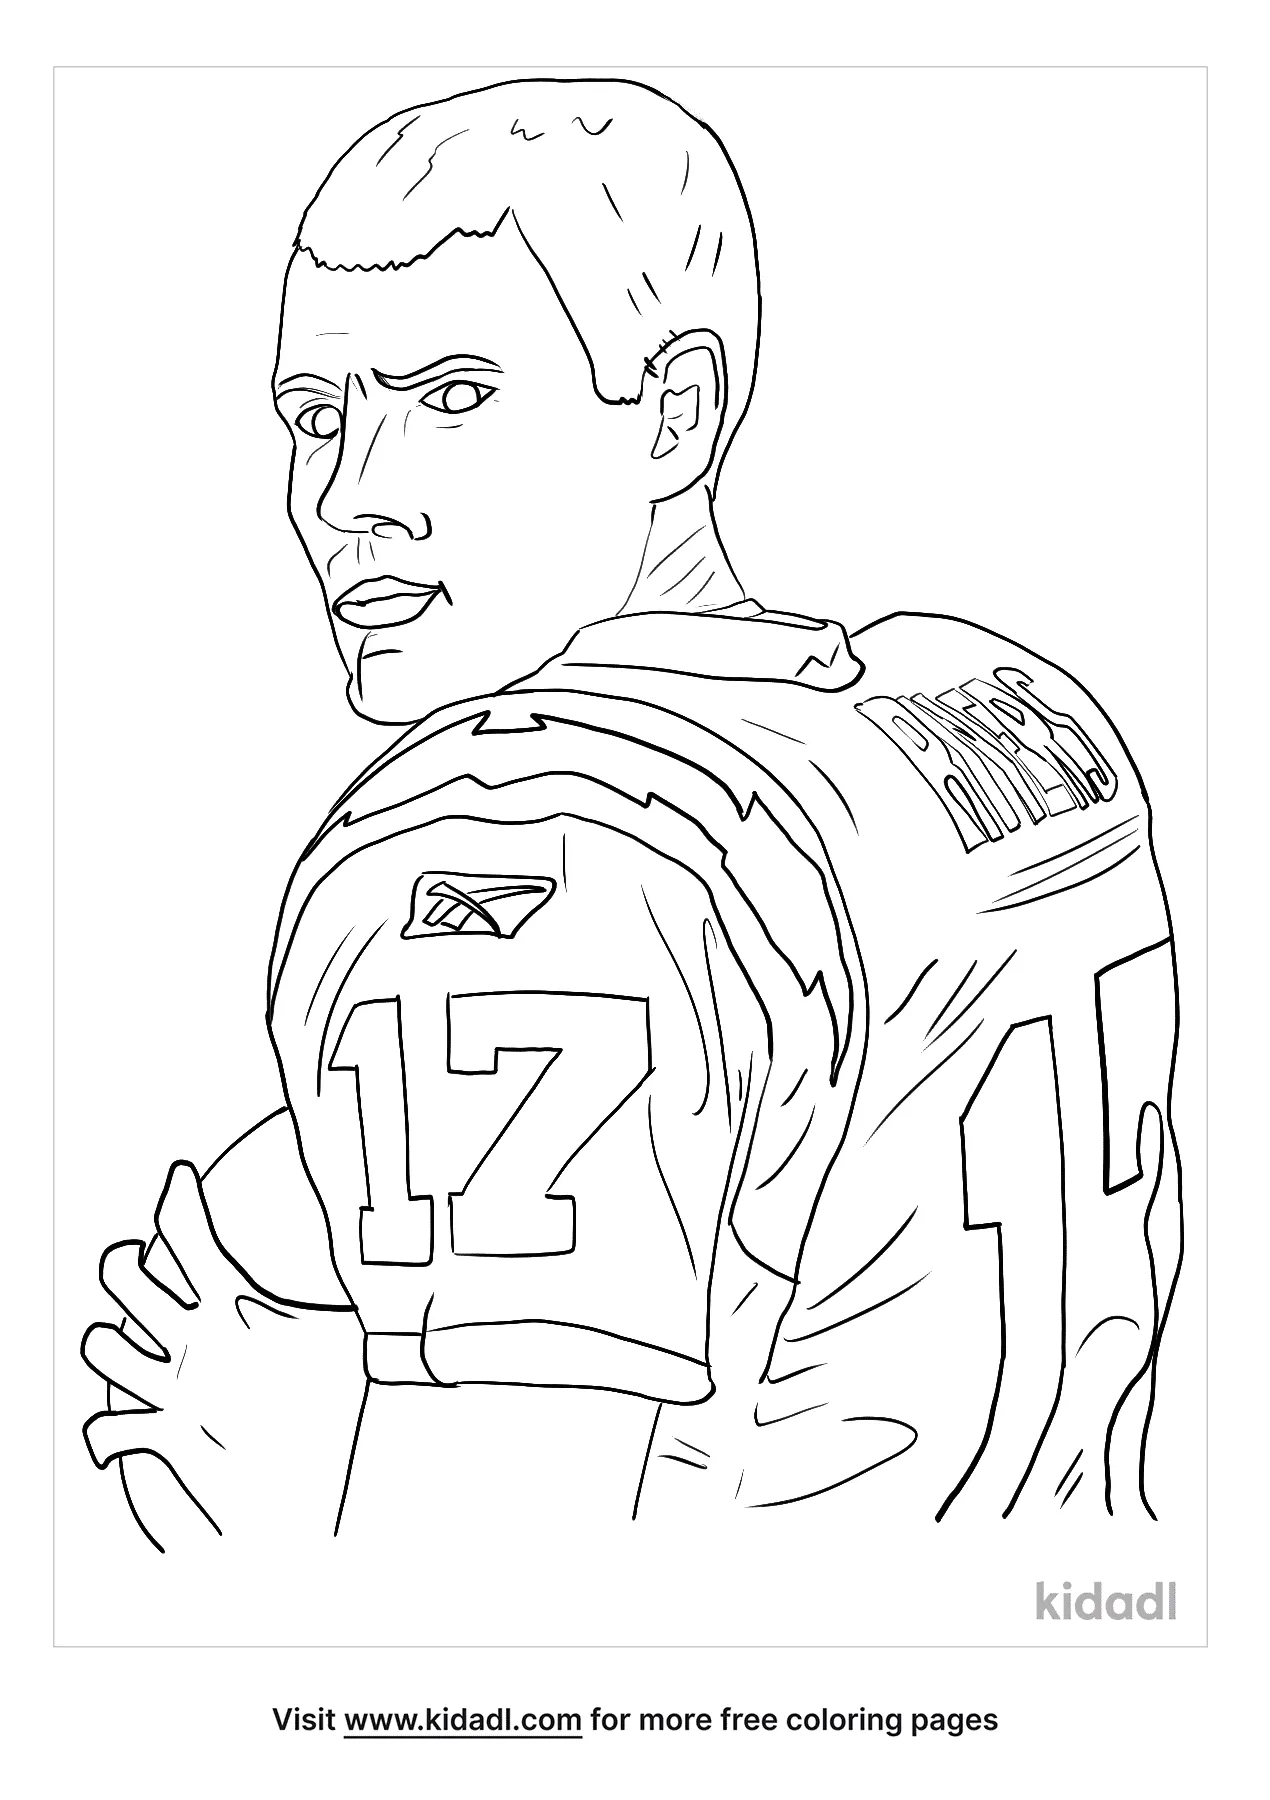 Philip Rivers Coloring Page